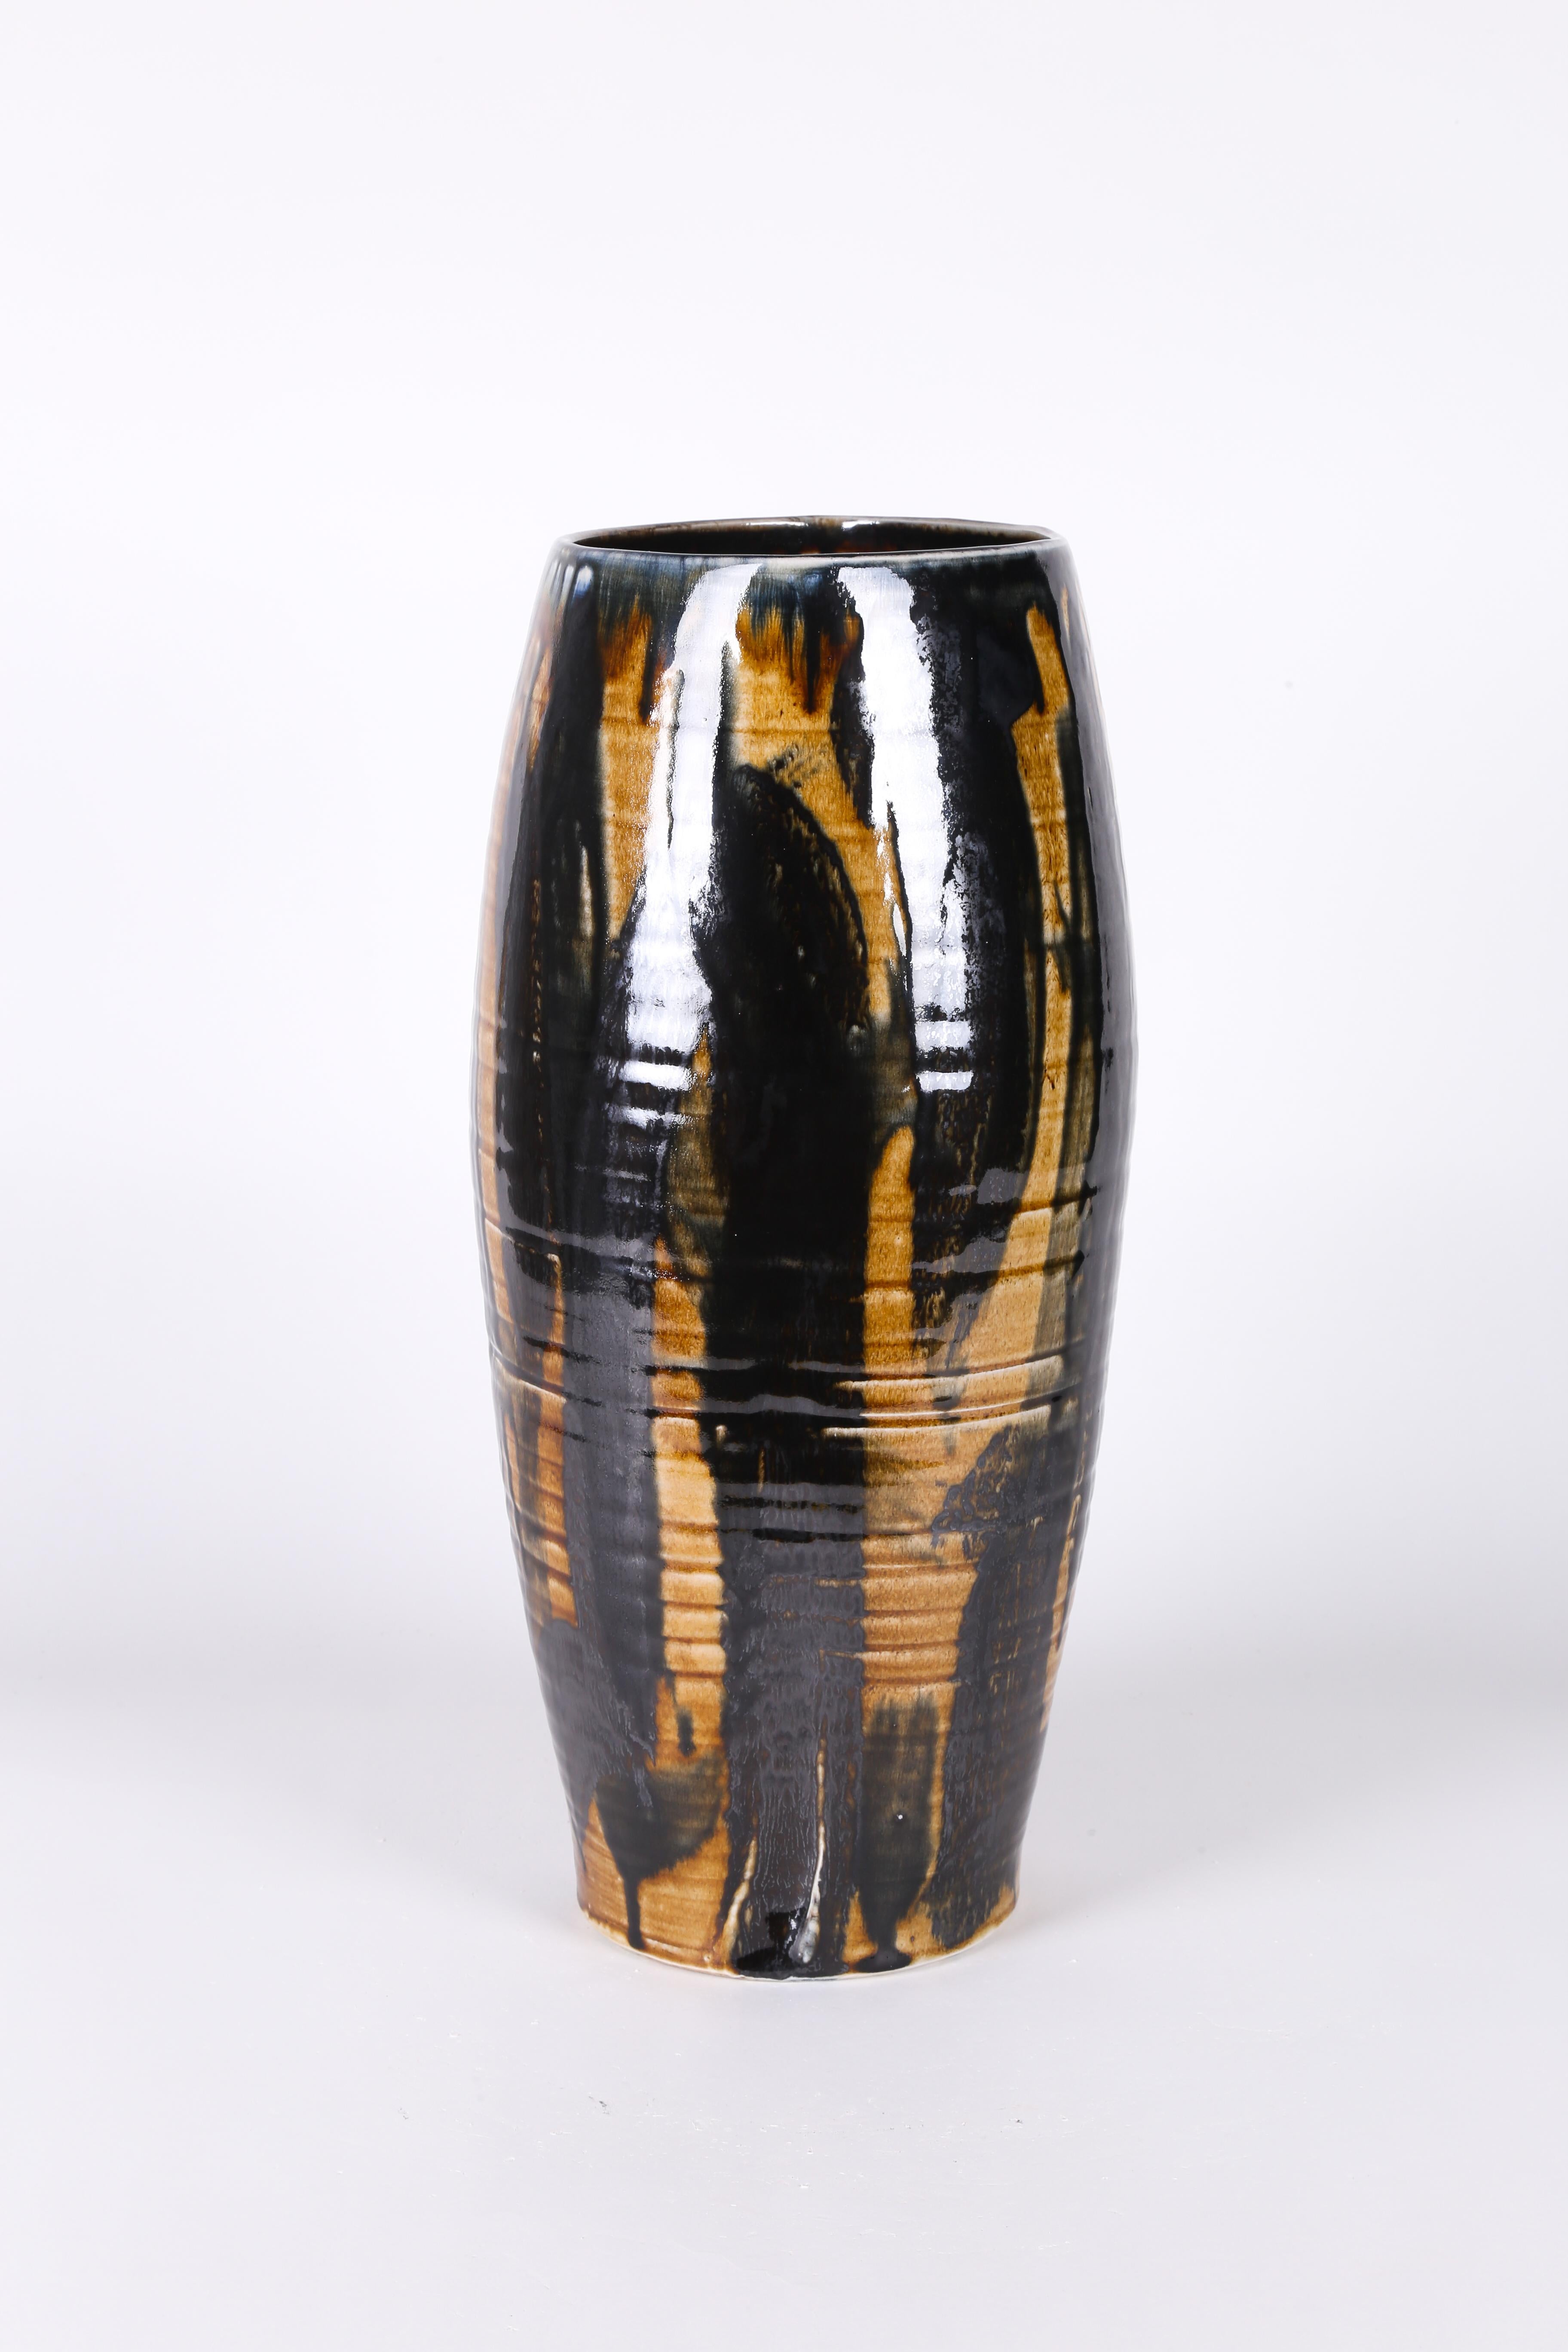 This elegant decorative ceramic vase in earth tone glaze by Black artist and potter Ebitenyefa Baralaye is a beautiful vessel that would look great upon a bookshelf or side table. This ceramic art object is made of stoneware, and covered in various